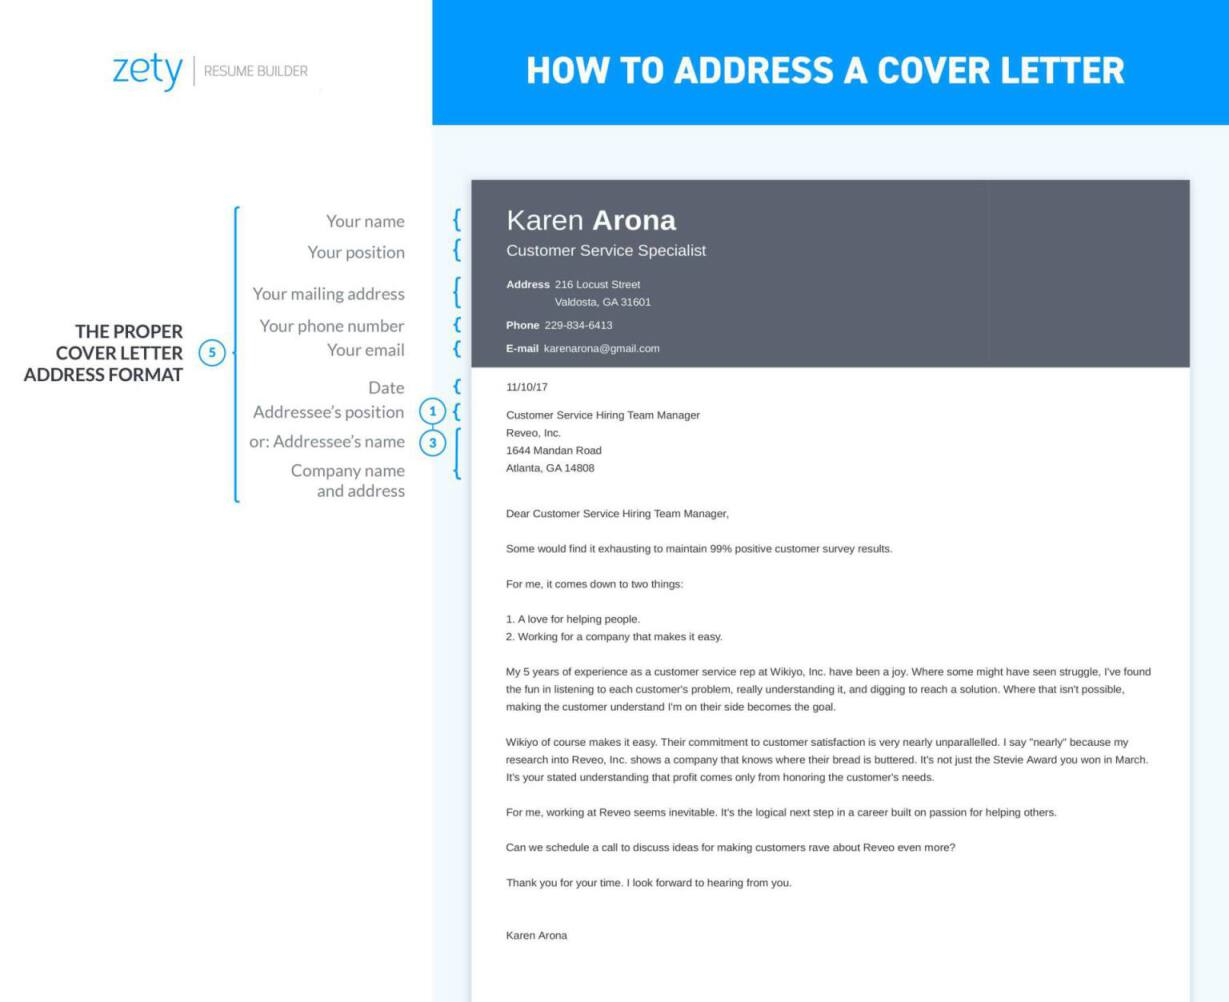 infographic about how to address a cover letter